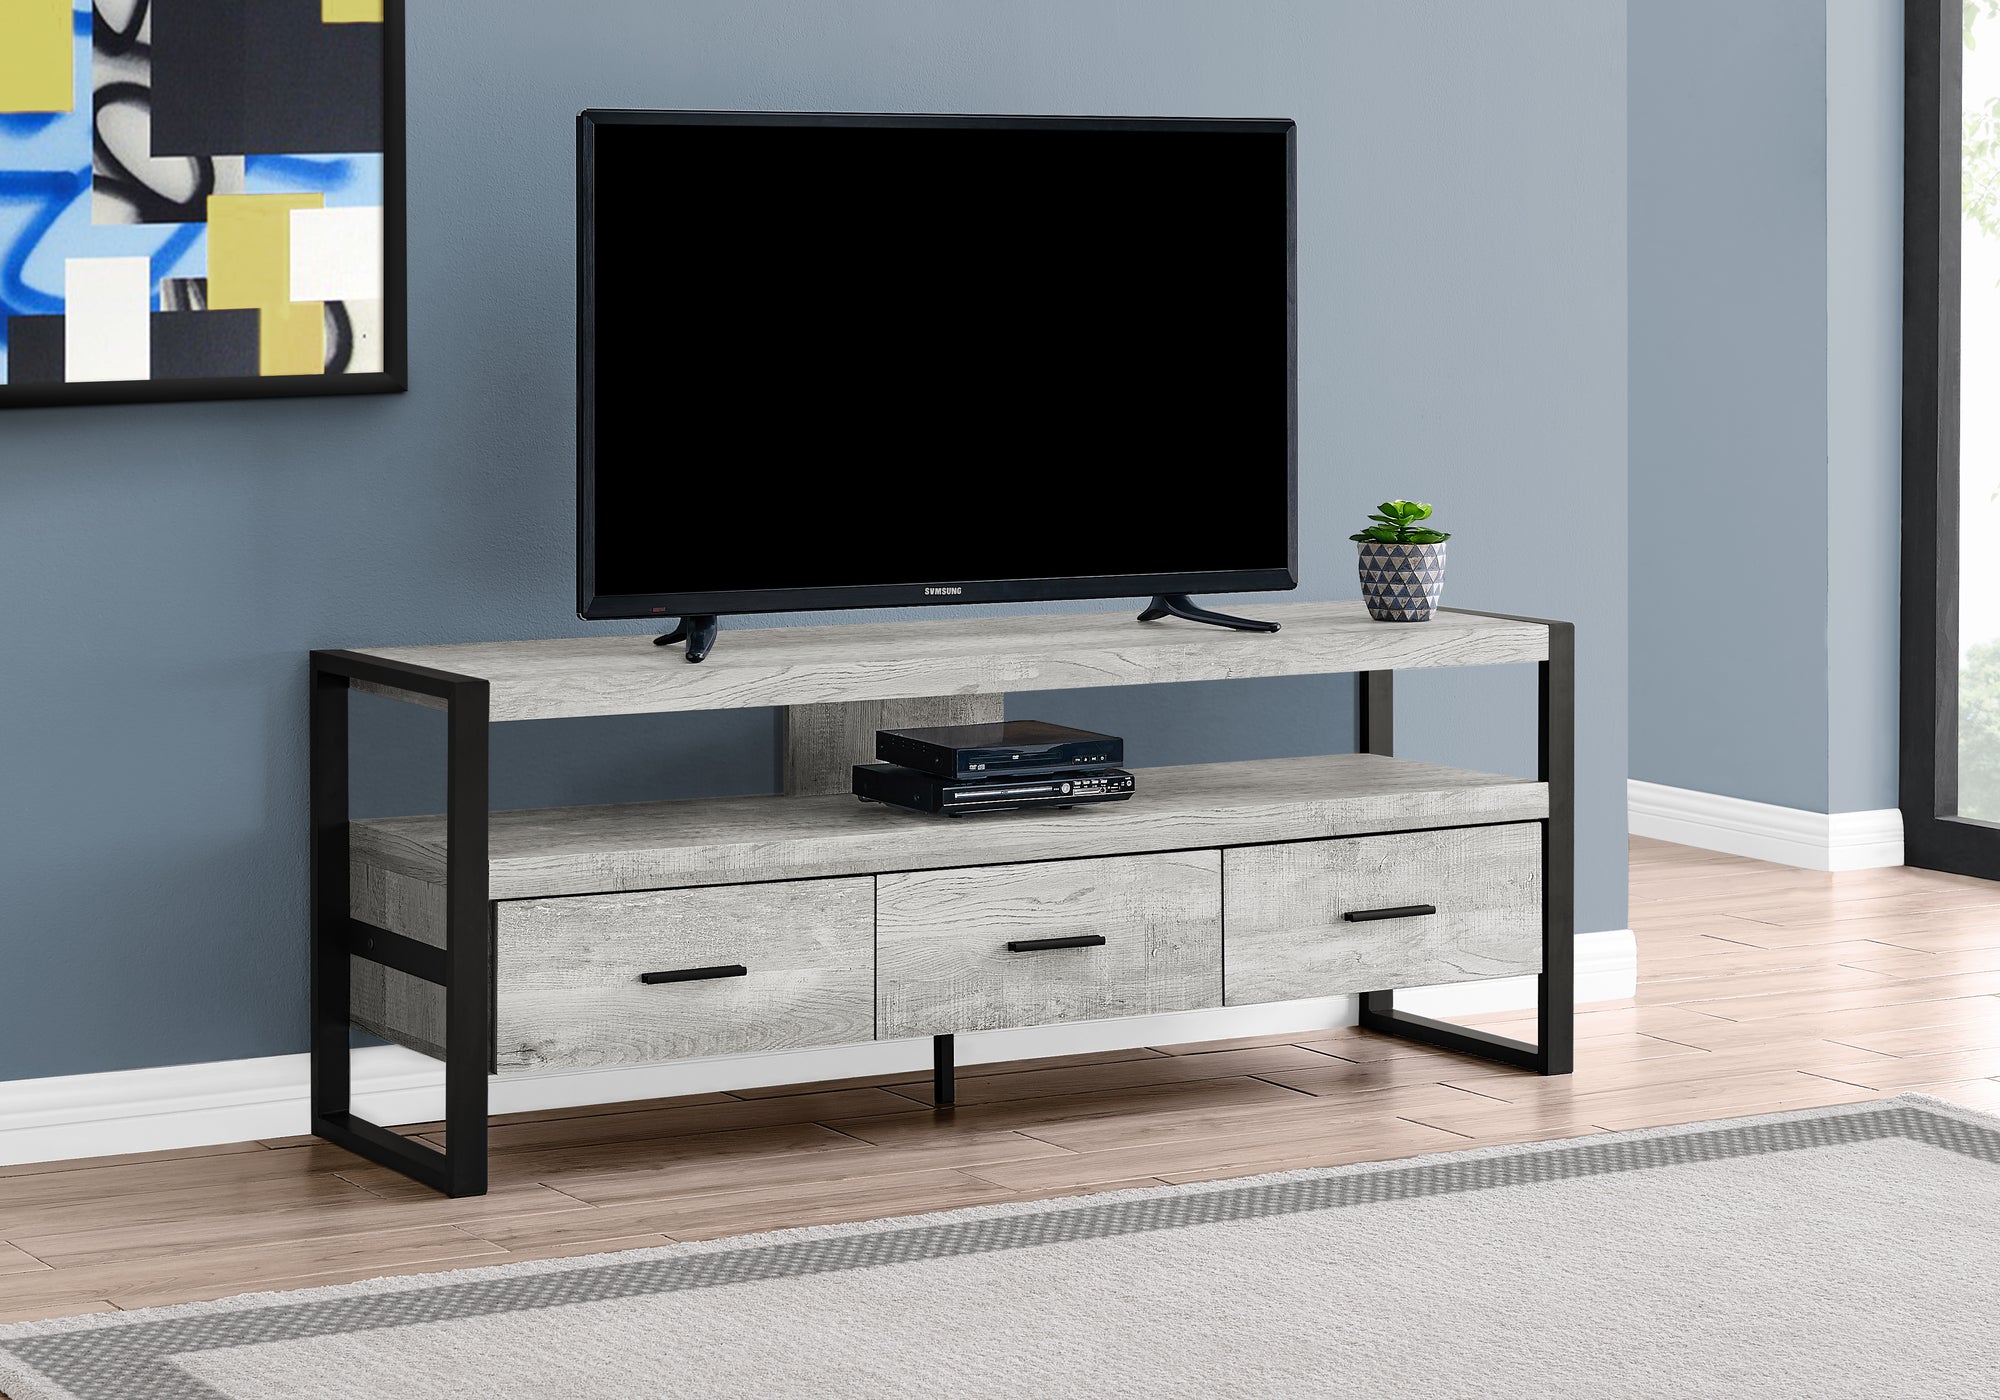 I 2821 TV STAND - 60"L / GREY RECLAIMED WOOD-LOOK / 3 DRAWERS BY MONARH SPECIALTIES INC